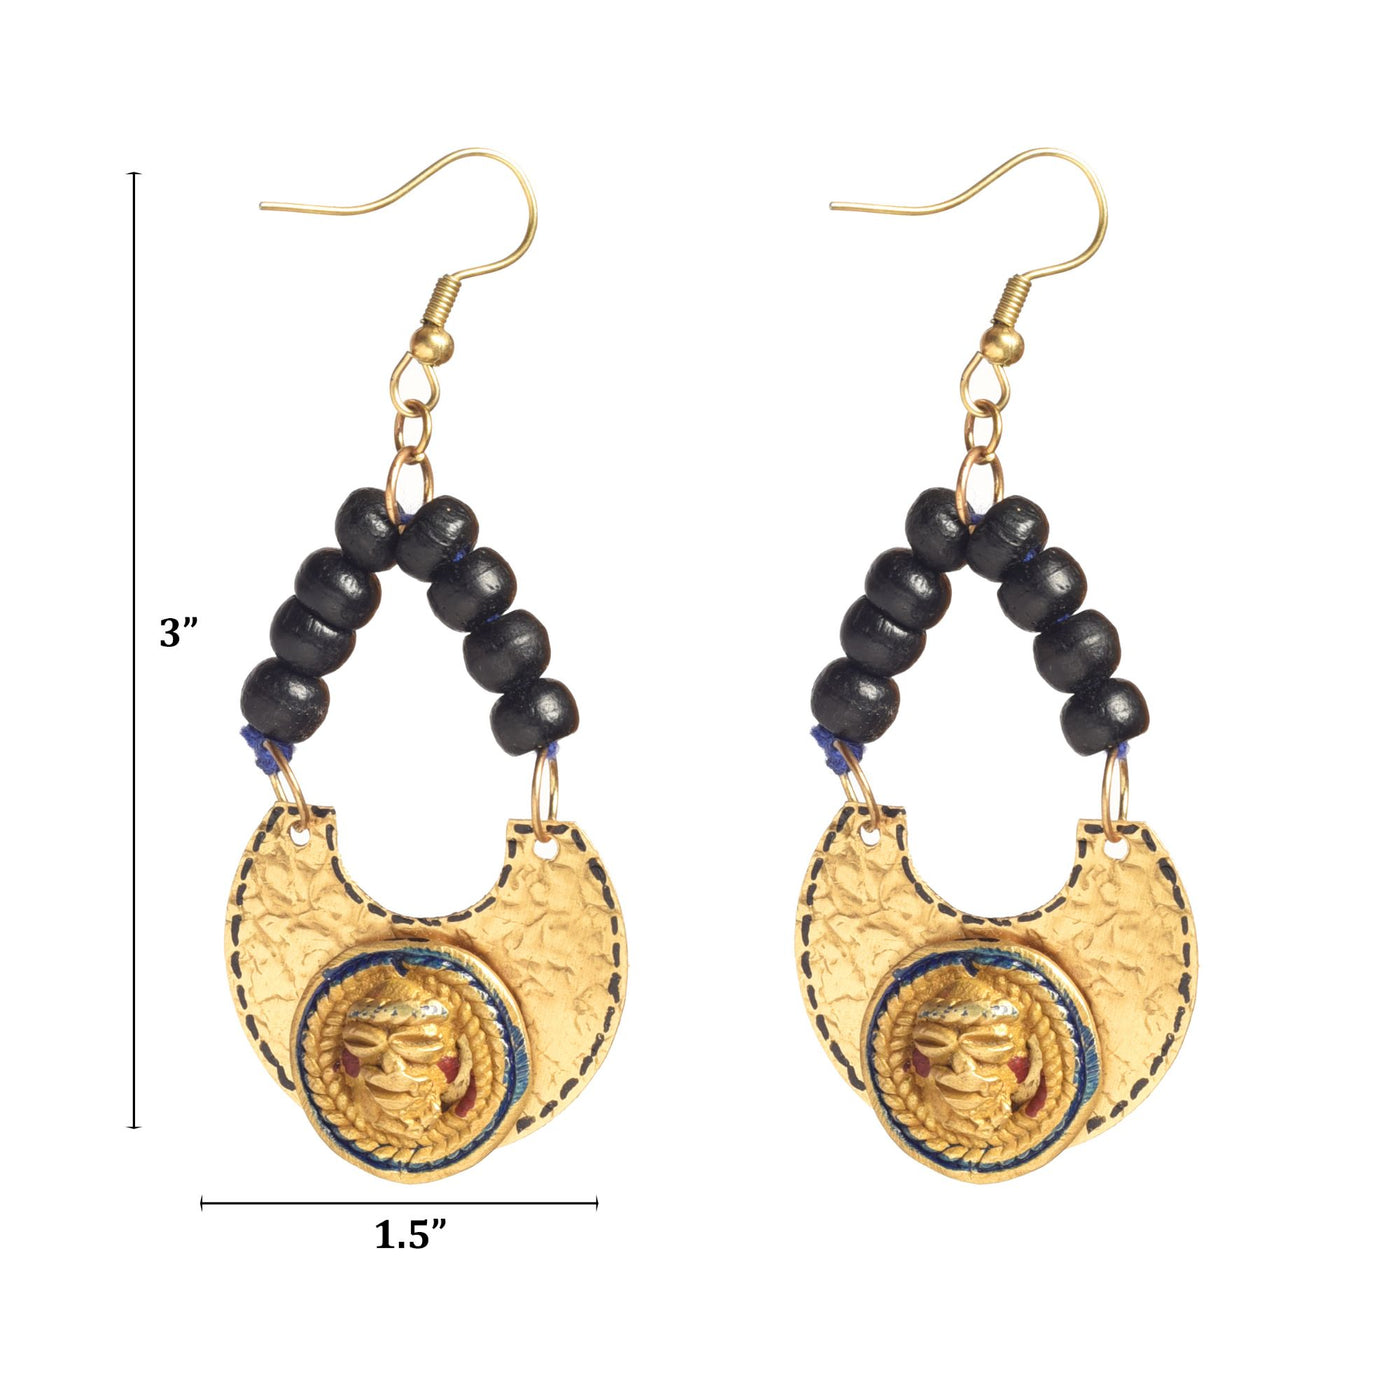 The Moon Queen Handcrafted Tribal Earrings - Fashion & Lifestyle - 5